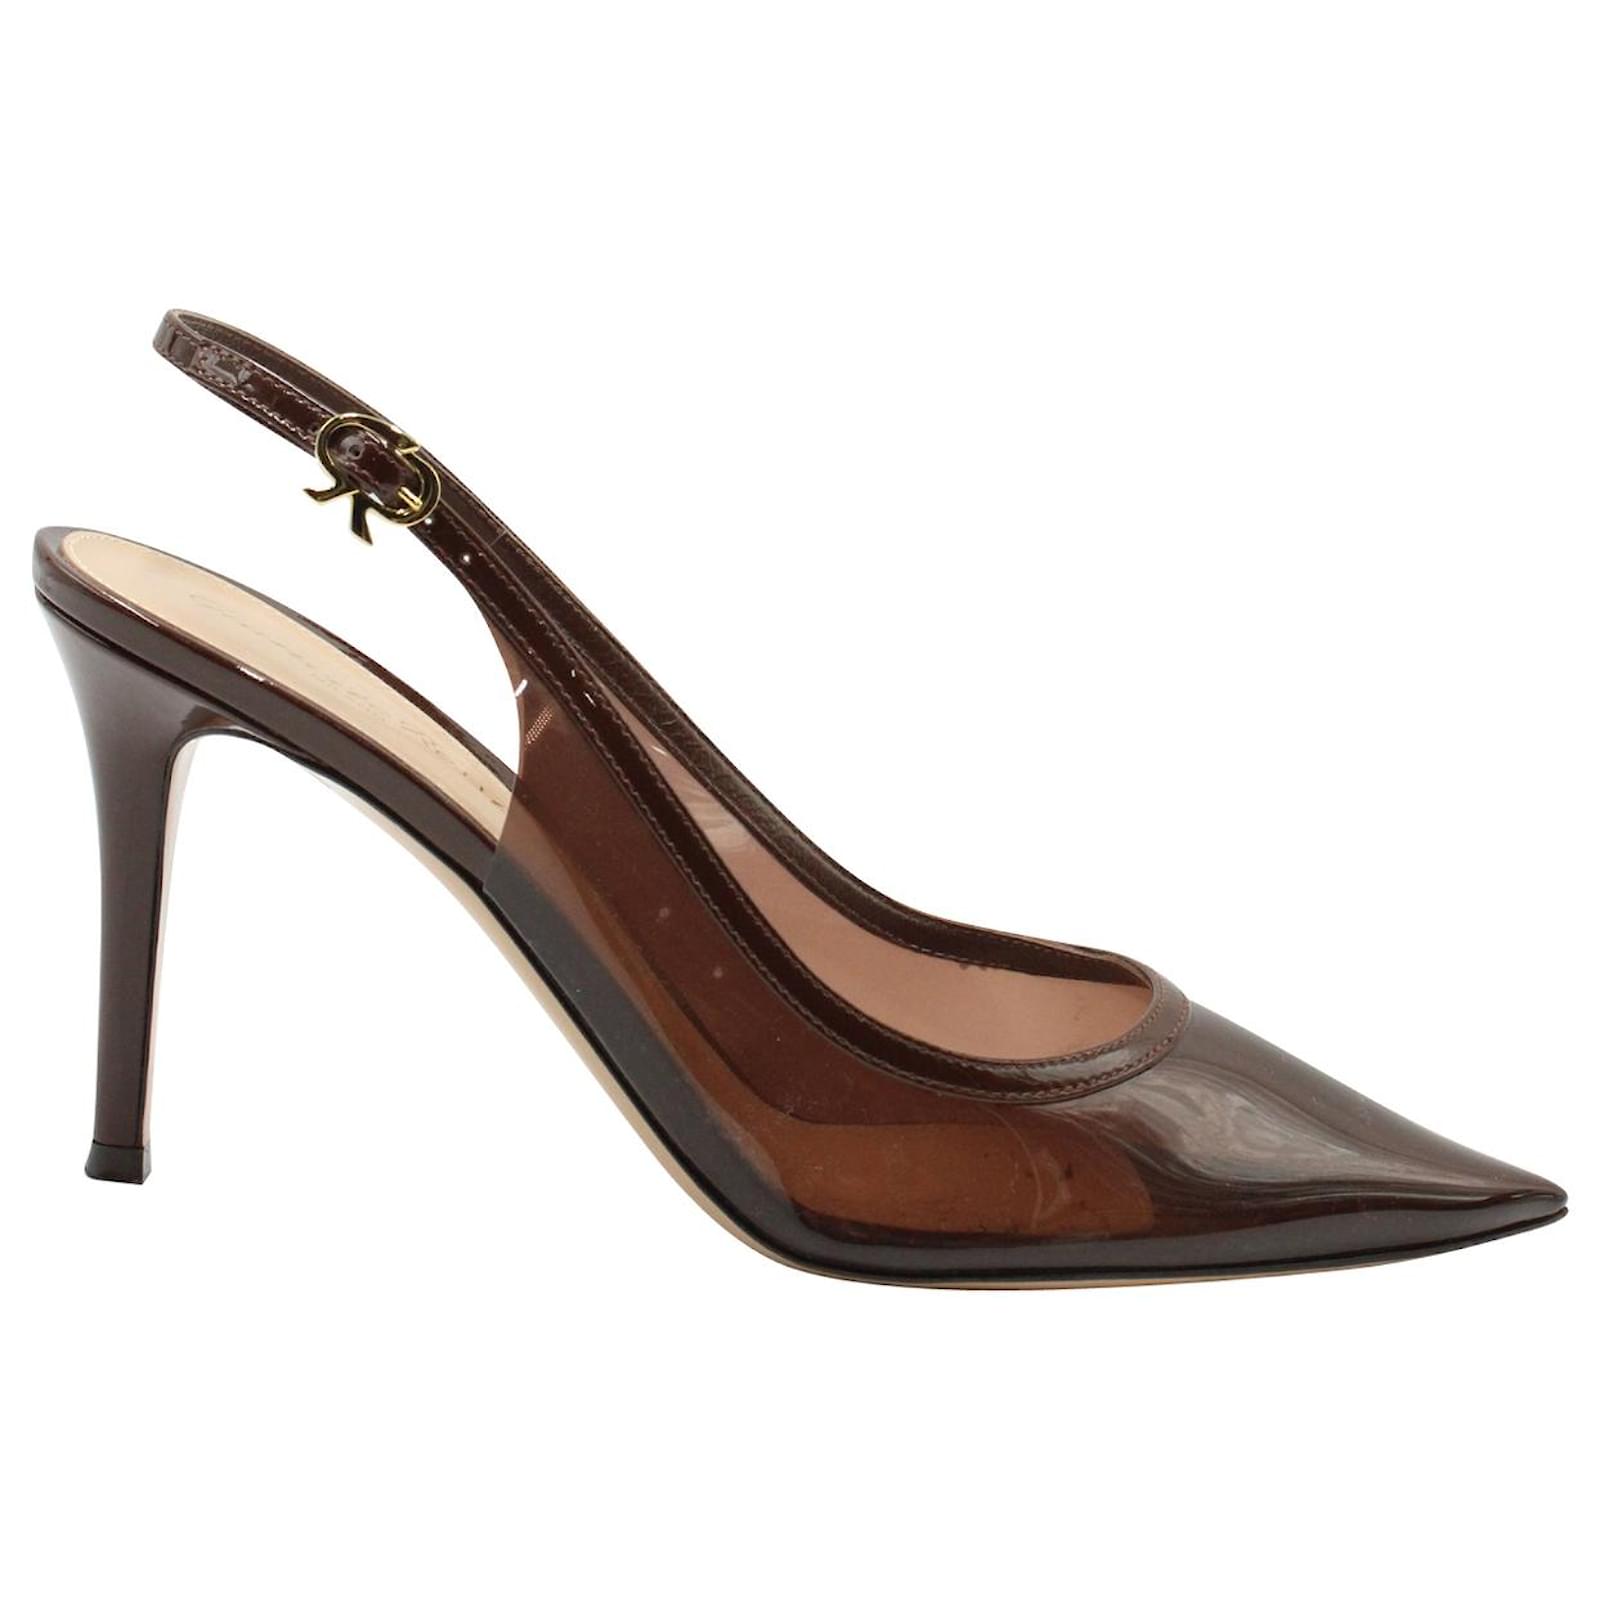 Gianvito Rossi Plexi 85 Slingback Pumps in Brown Leather-Trimmed PVC ...